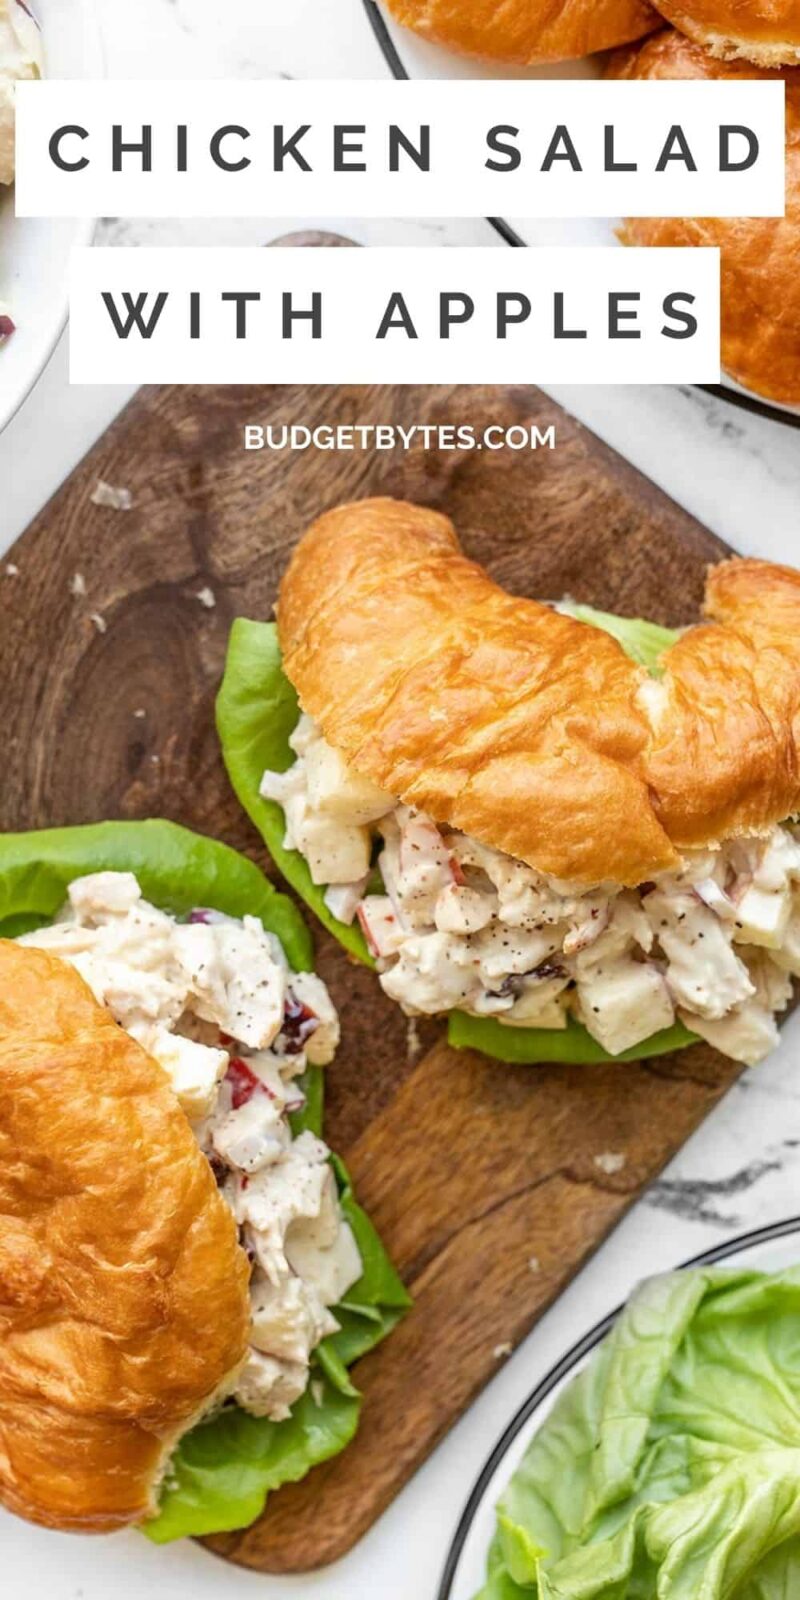 Chicken salad sandwiches on croissants, title text at the top